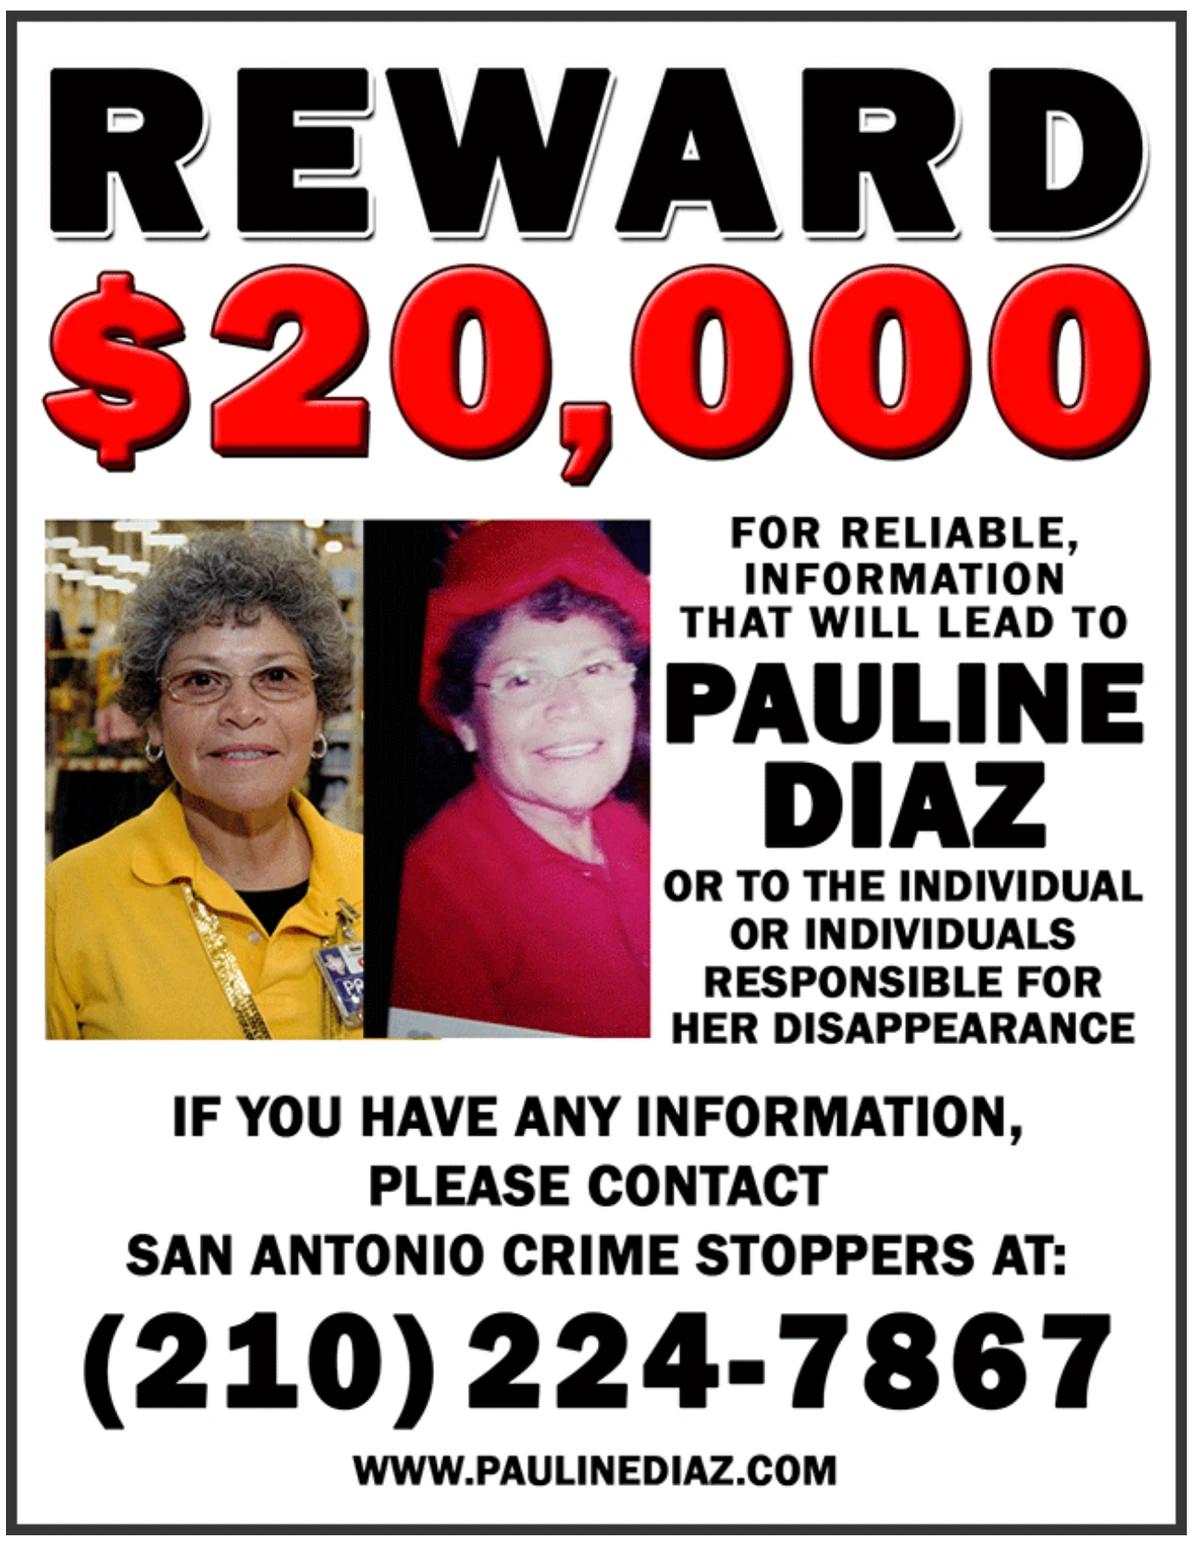 A photo of Pauline's missing person banner